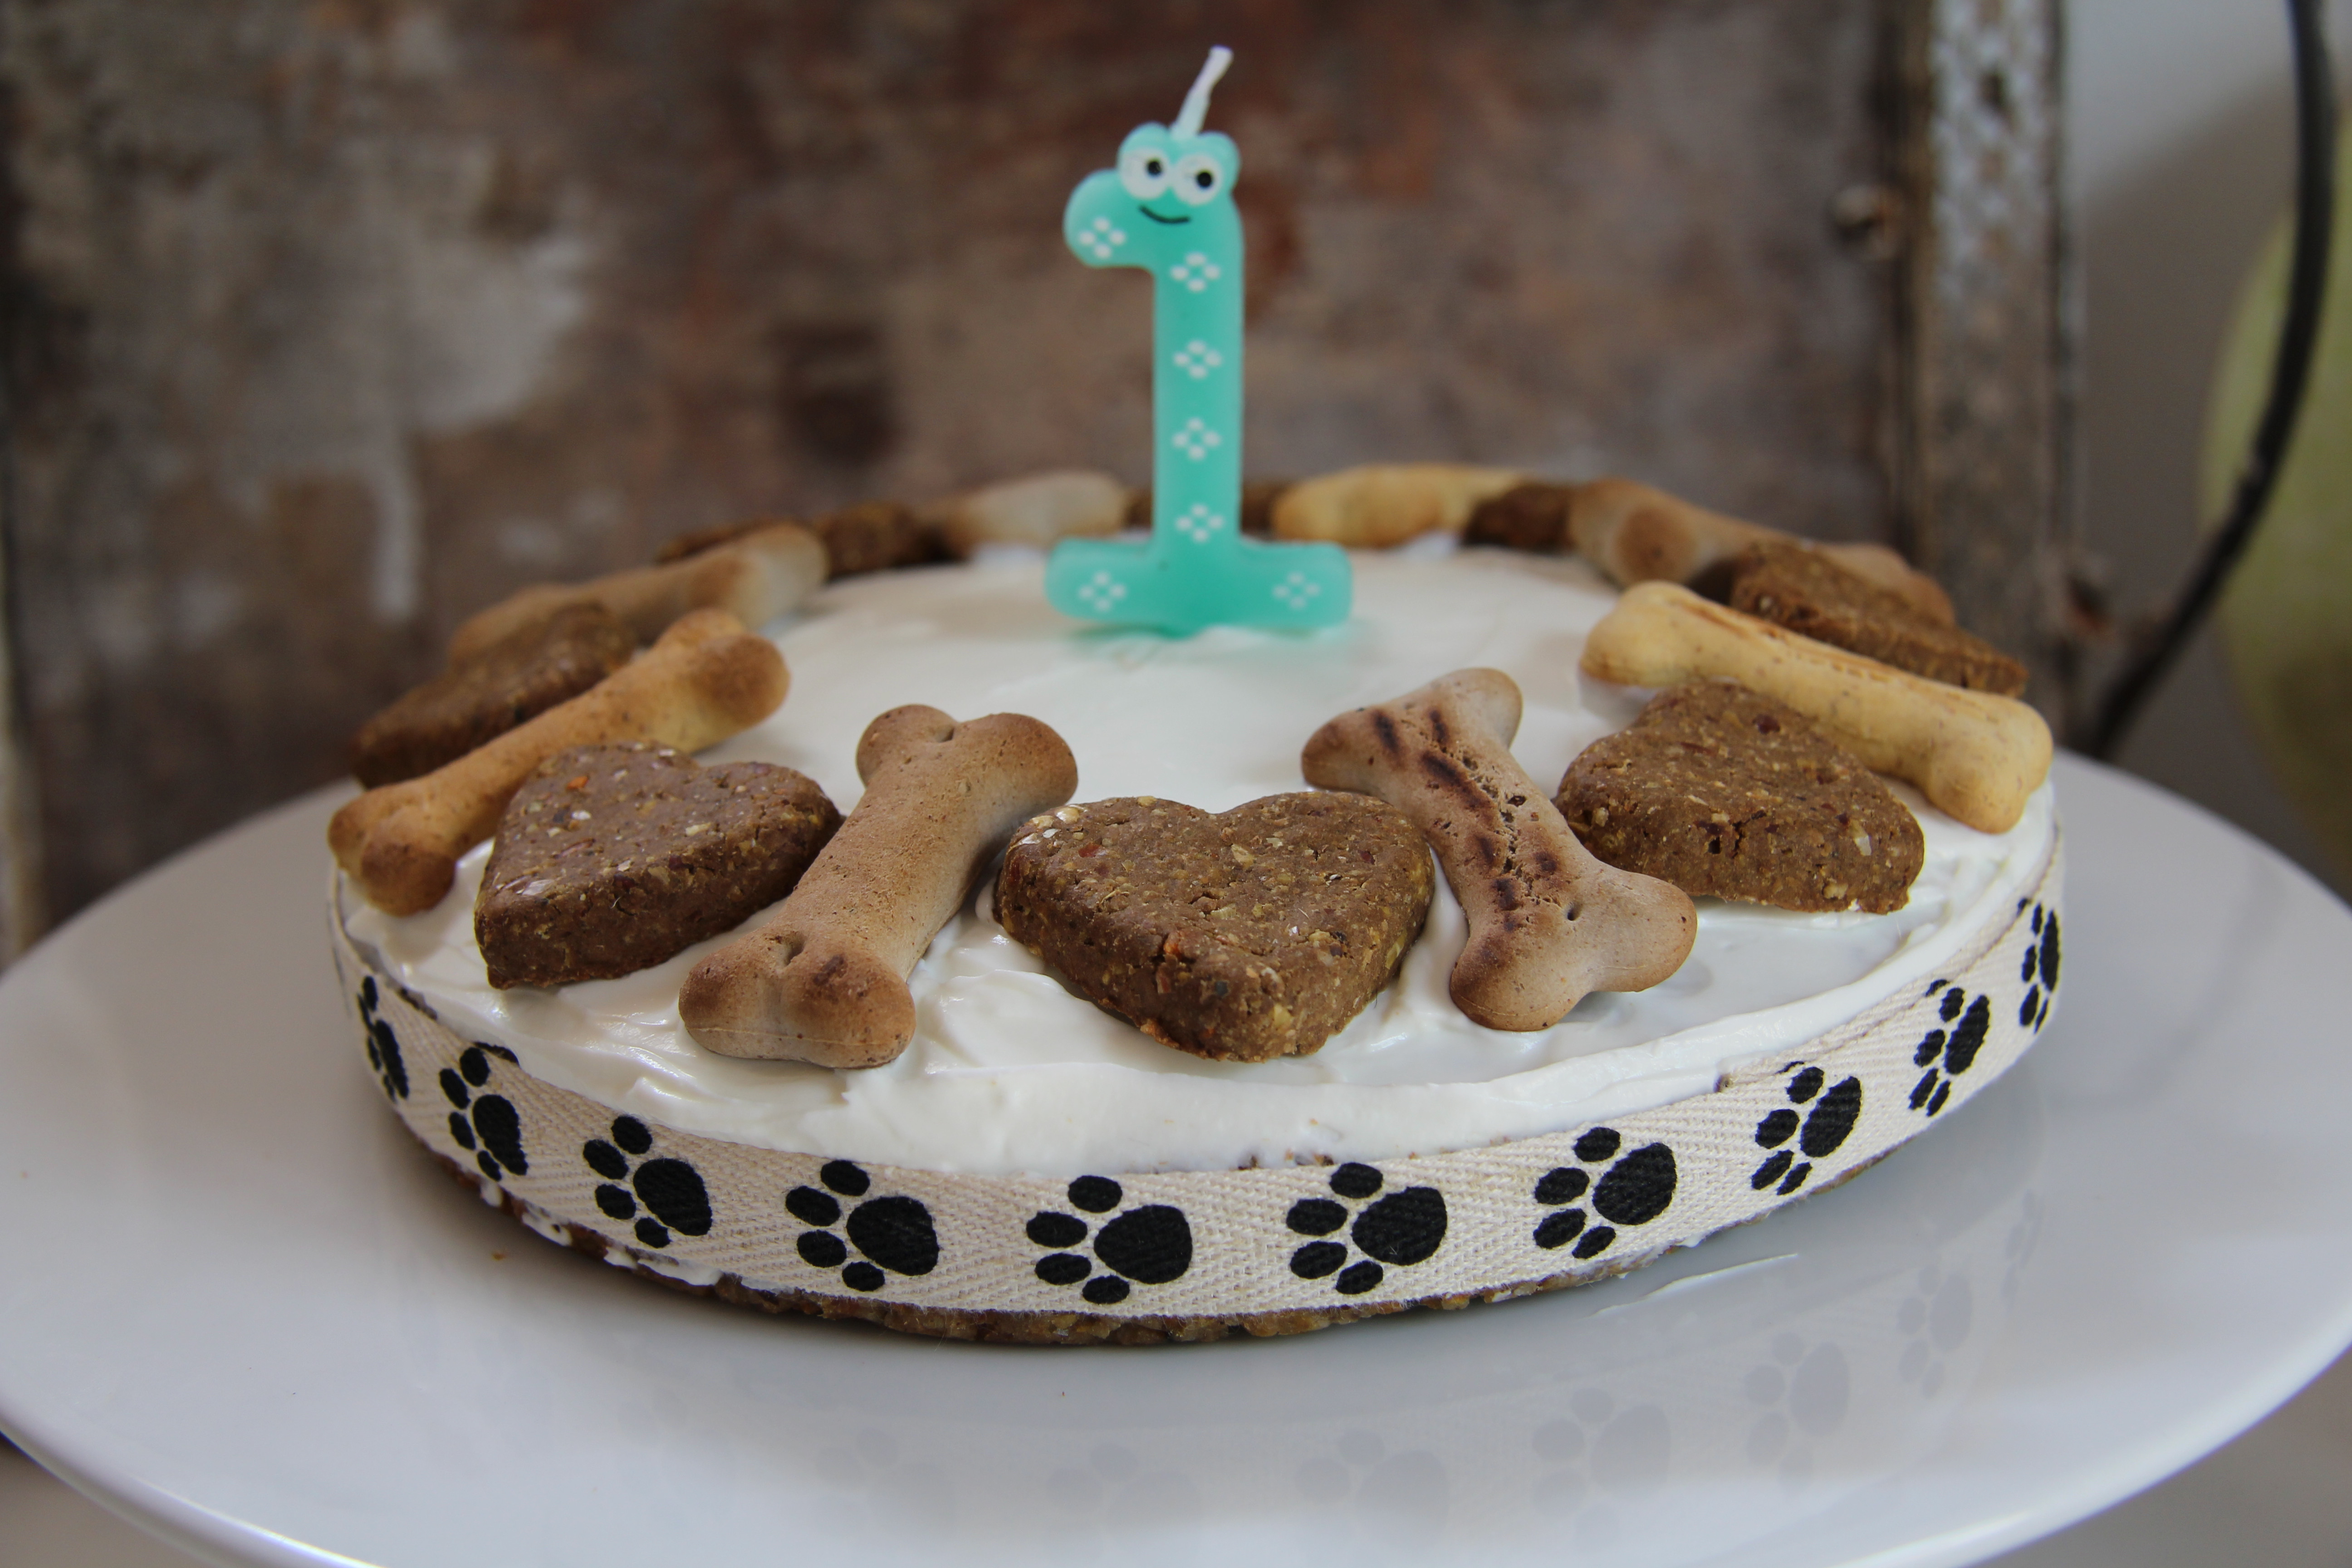 Doggie Birthday Cake
 LoveFoodIbiza Couscous Carrot Birthday Cake for dogs